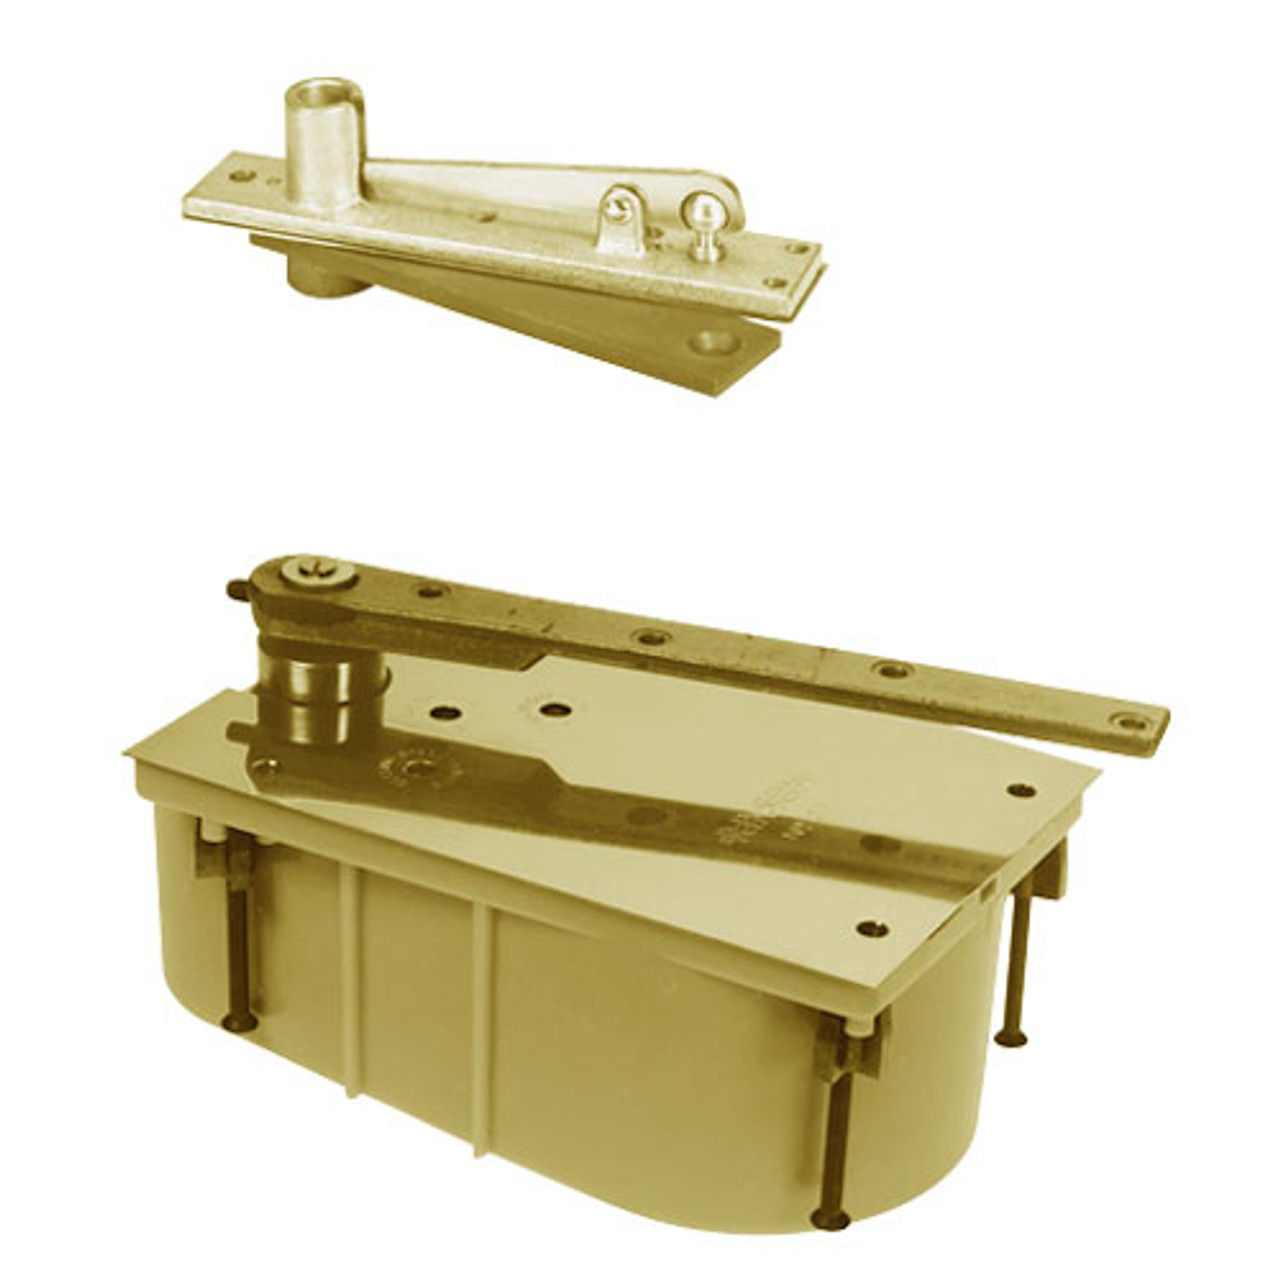 28-105S-554-CWF-LH-606 Rixson 28 Series Heavy Duty Single Acting Center Hung Floor Closer with Concealed Arm in Satin Brass Finish